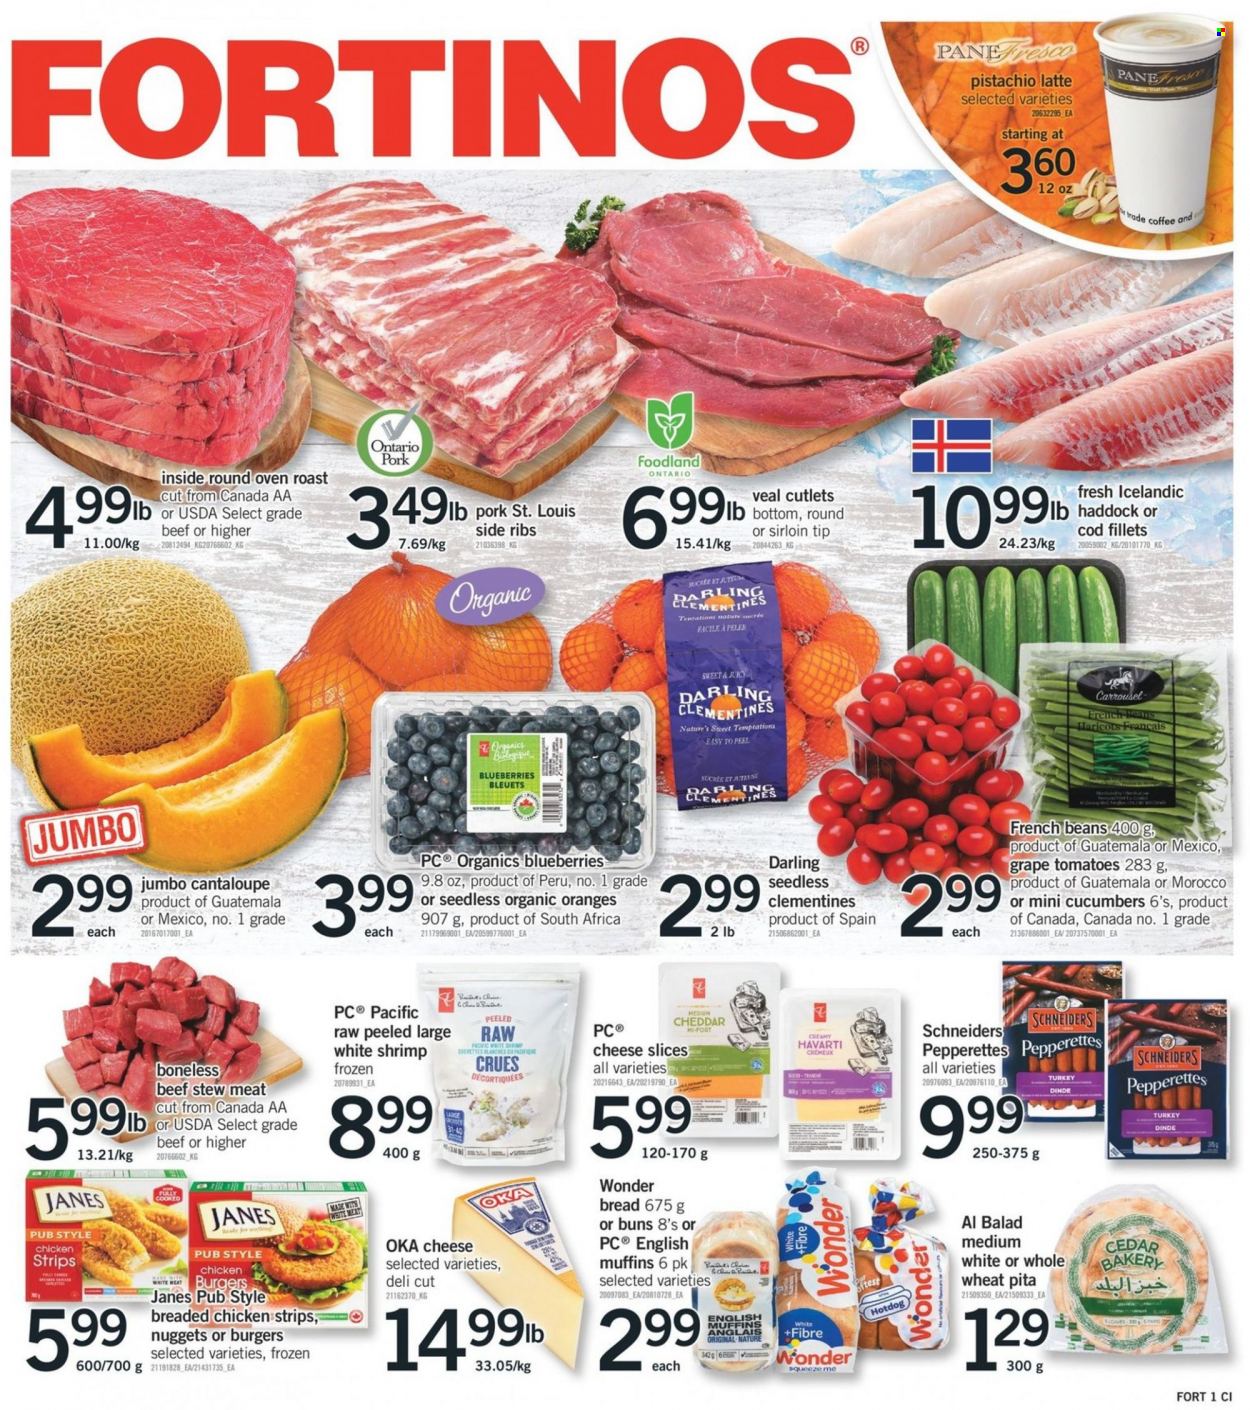 thumbnail - Fortinos Flyer - November 24, 2022 - November 30, 2022 - Sales products - stew meat, bread, english muffins, hot dog rolls, pita, buns, cantaloupe, cucumber, french beans, tomatoes, blueberries, clementines, oranges, cod, haddock, shrimps, hot dog, nuggets, fried chicken, sliced cheese, Havarti, cheddar, cheese, strips, chicken strips, coffee, veal cutlet, veal meat, oven. Page 1.